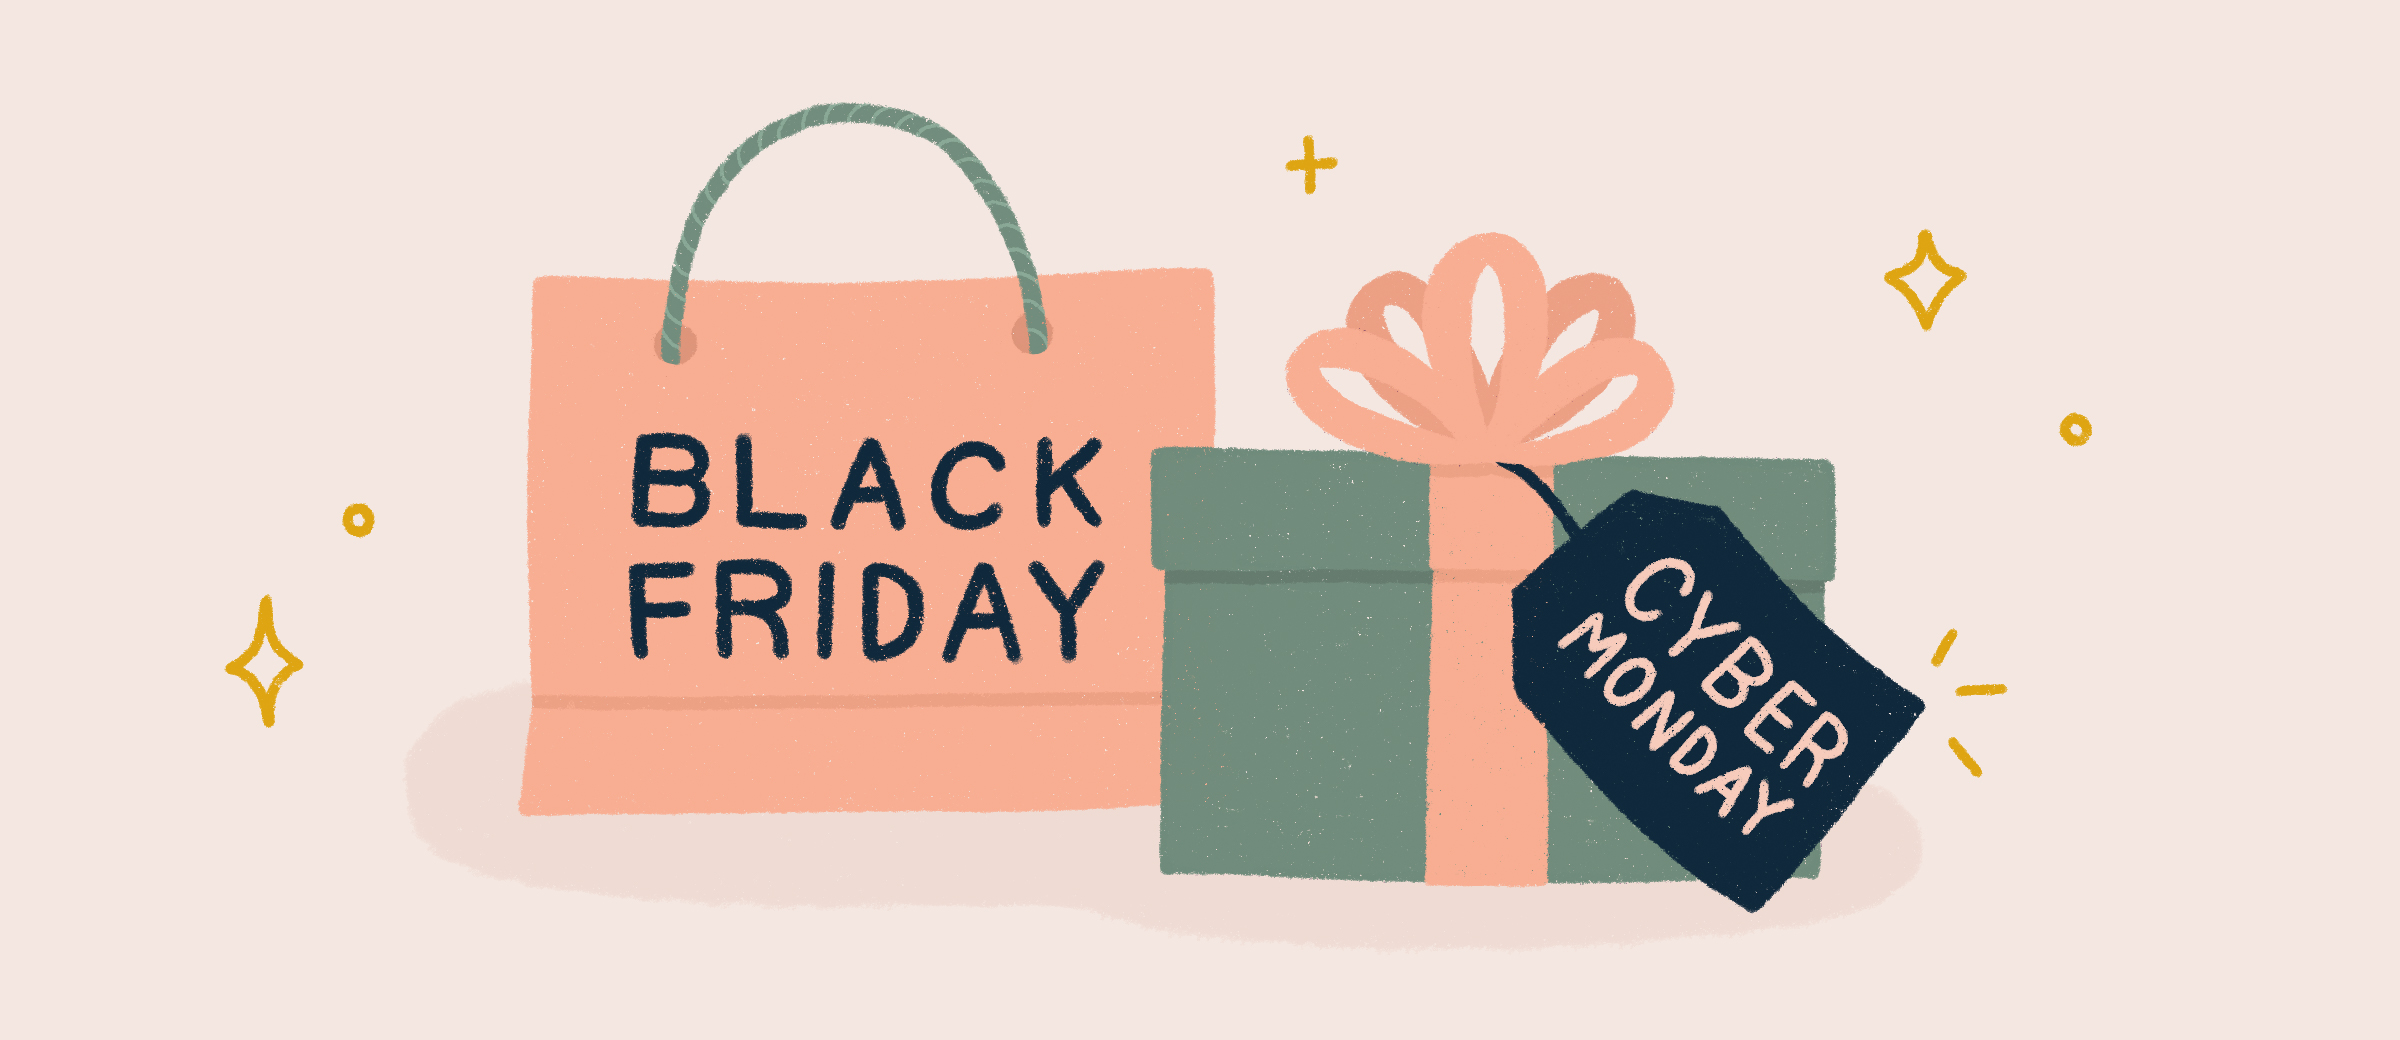 Black Friday and Cyber Monday Marketing and Content Ideas, by carrie-boswell